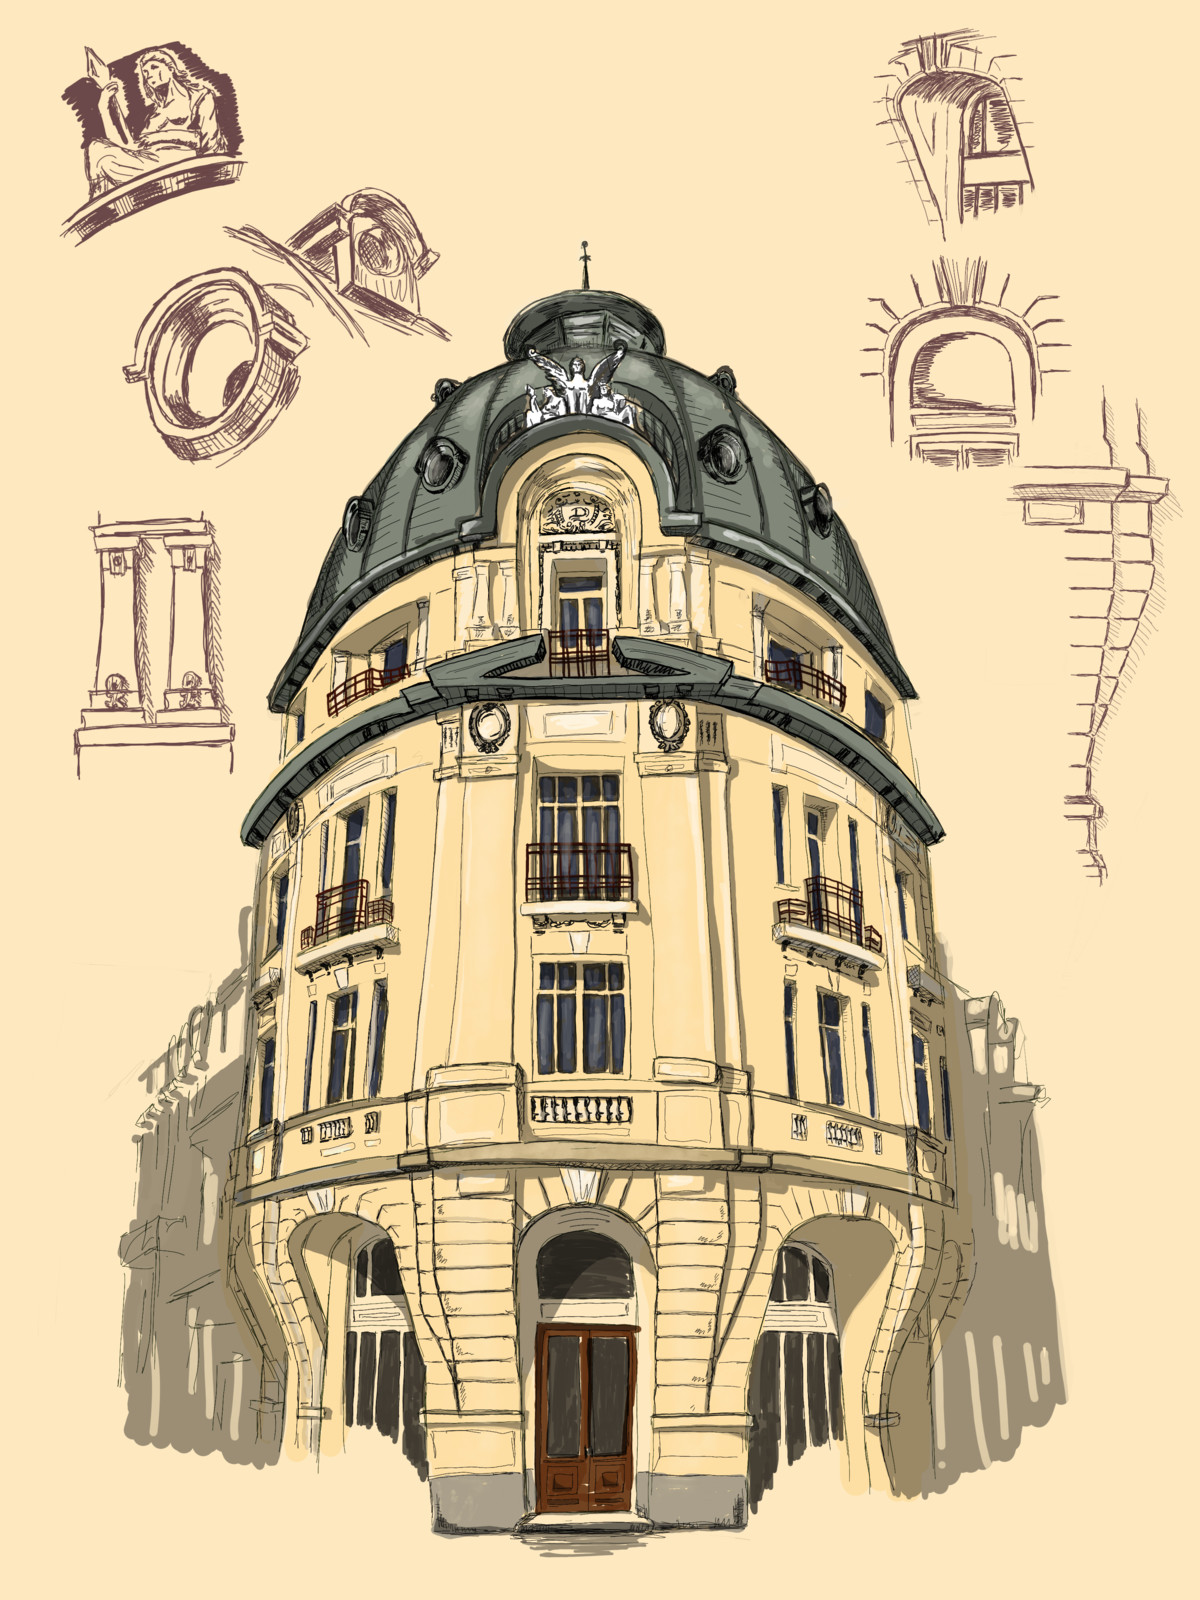 Architectural sketch study